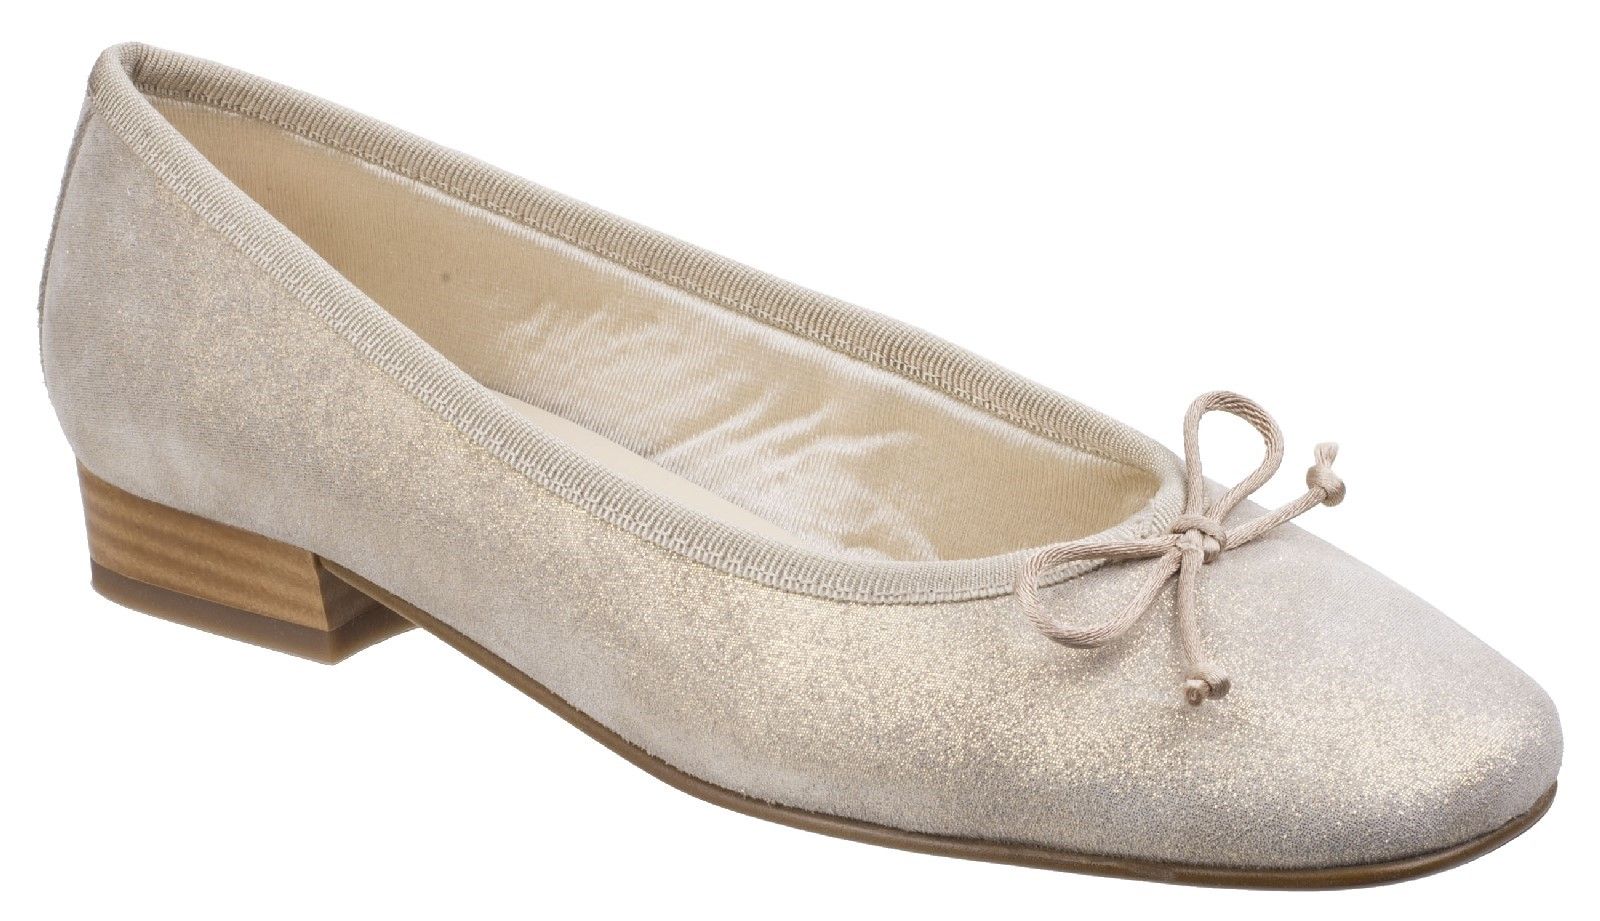 Riva are renowned for their vast collection of ballerinas, original design, sumptuous materials and colour combinations. This ballet court takes you day to night with clever glistening mosaic print and elegant metallic cap toe.Ladies slip on ballerina court shoe. 
Supple suede upper with mosaic glitter metallic print. 
Delicate bow and shimmering toe cap overlay. 
Wide opening with leather rim finish. 
Silky smooth comfort padded textile lining.